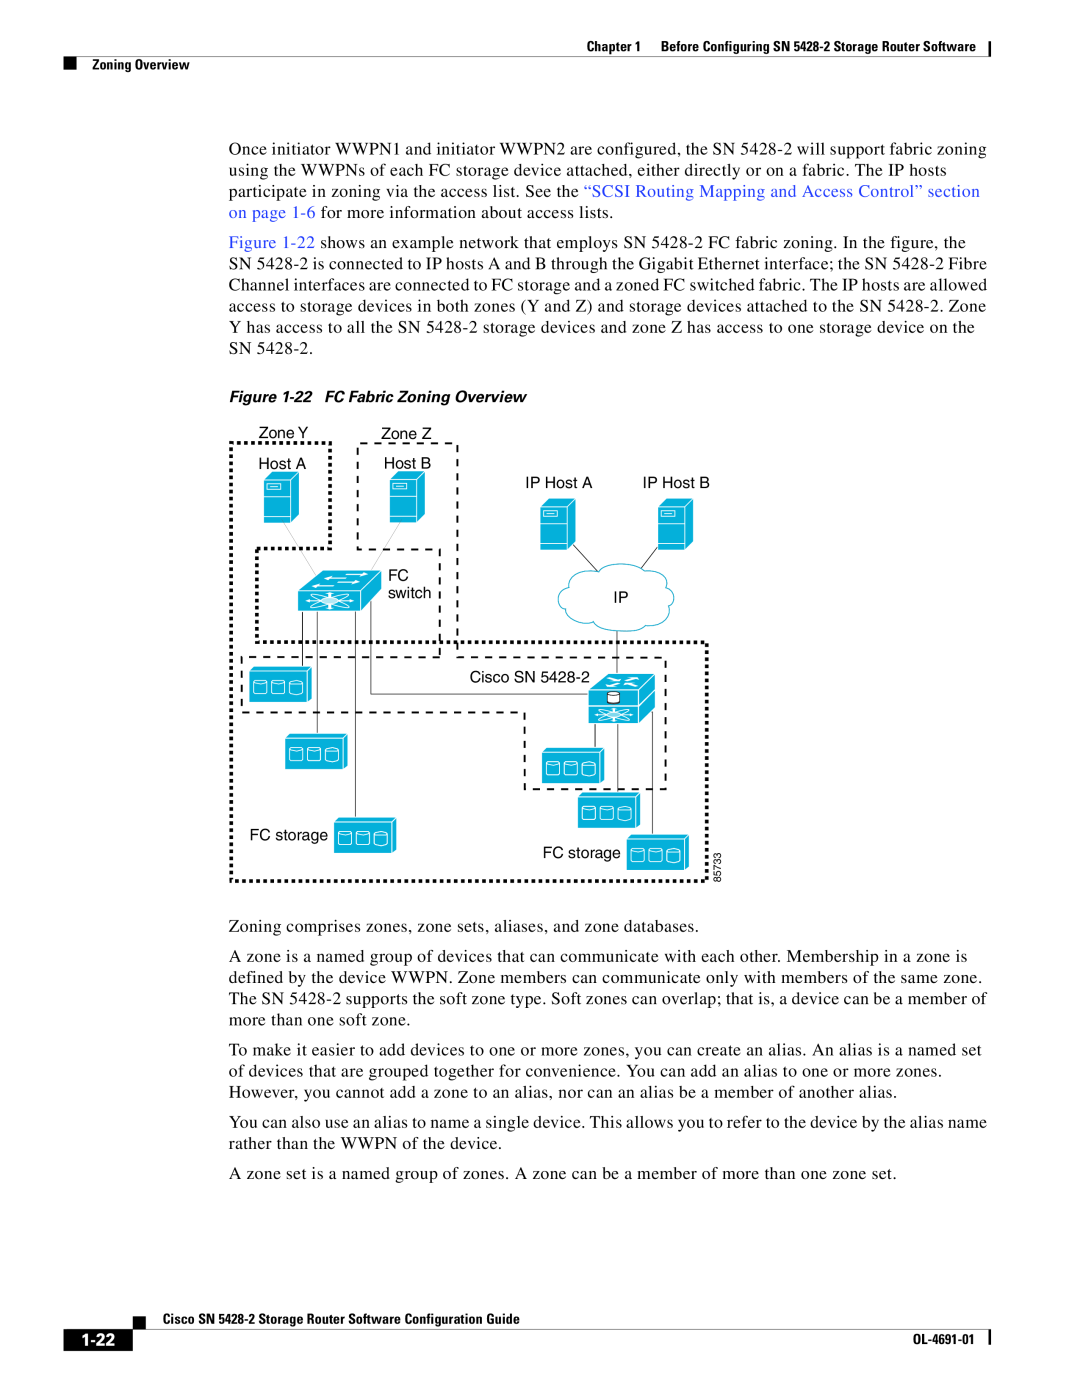 Cisco Systems SN 5428-2 manual 1-22, Zoning comprises zones, zone sets, aliases, and zone databases 